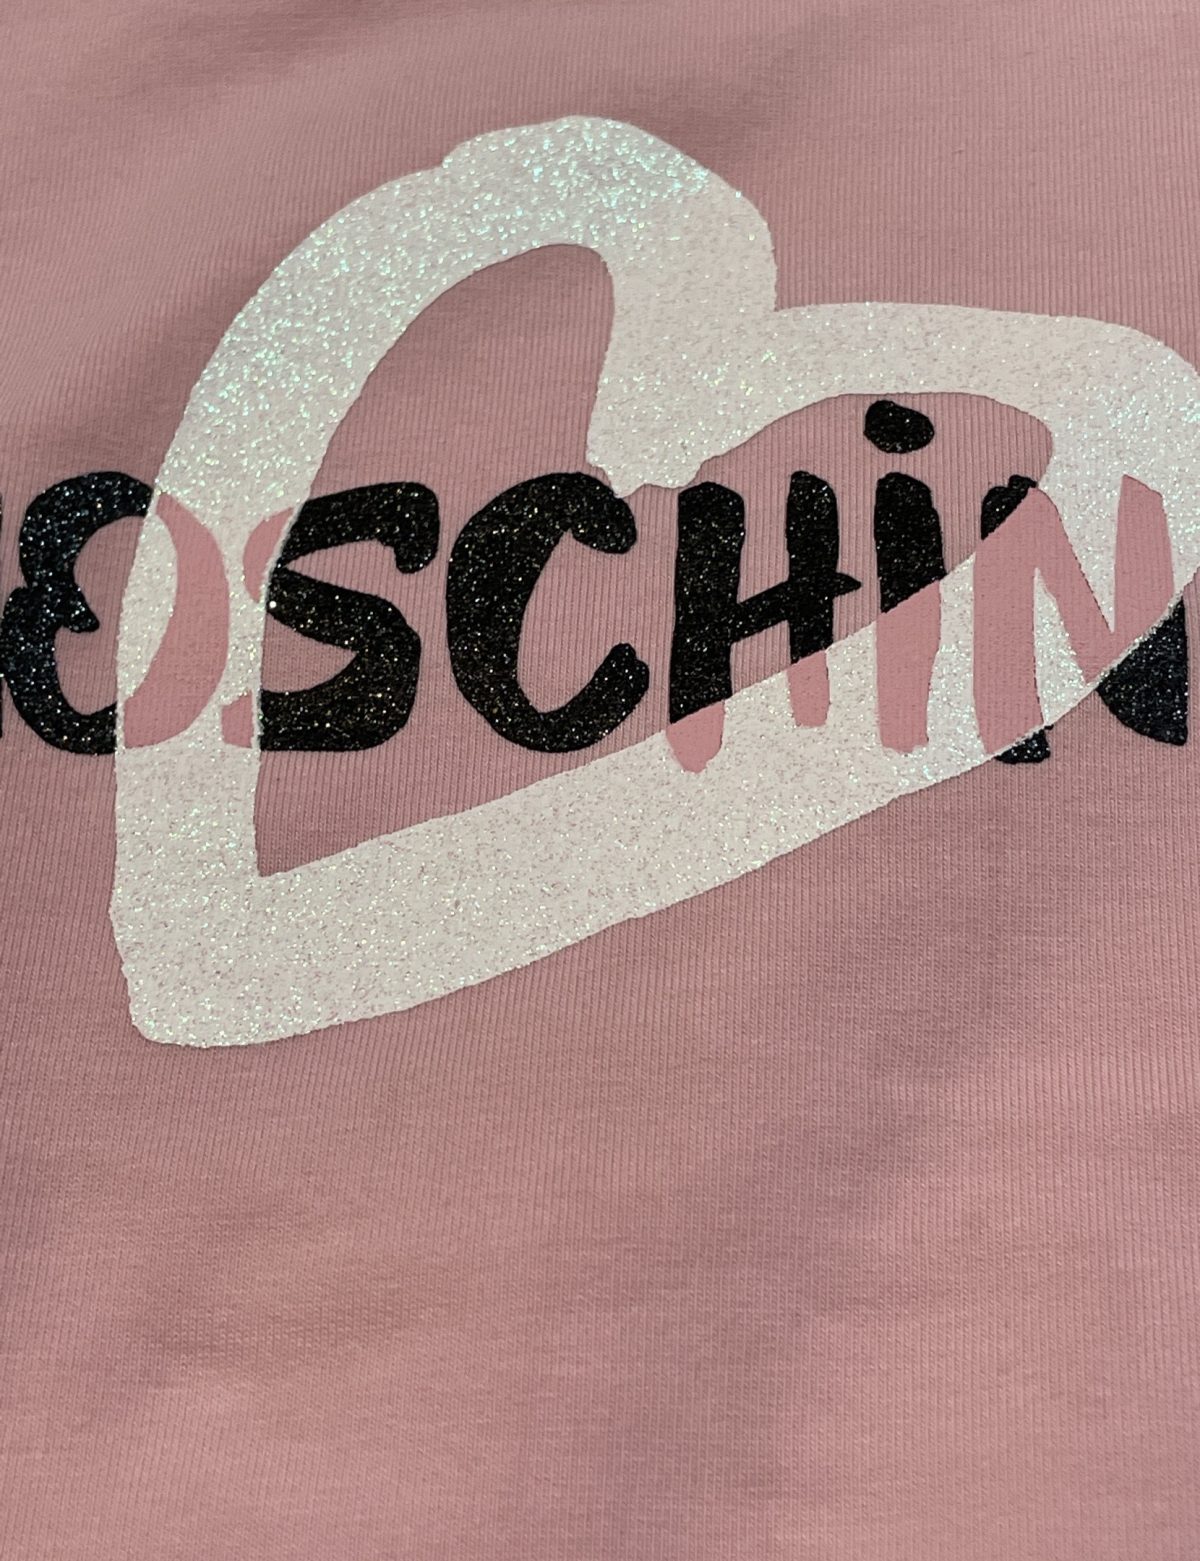 moschino-lany-rozsaszin-pulover-3